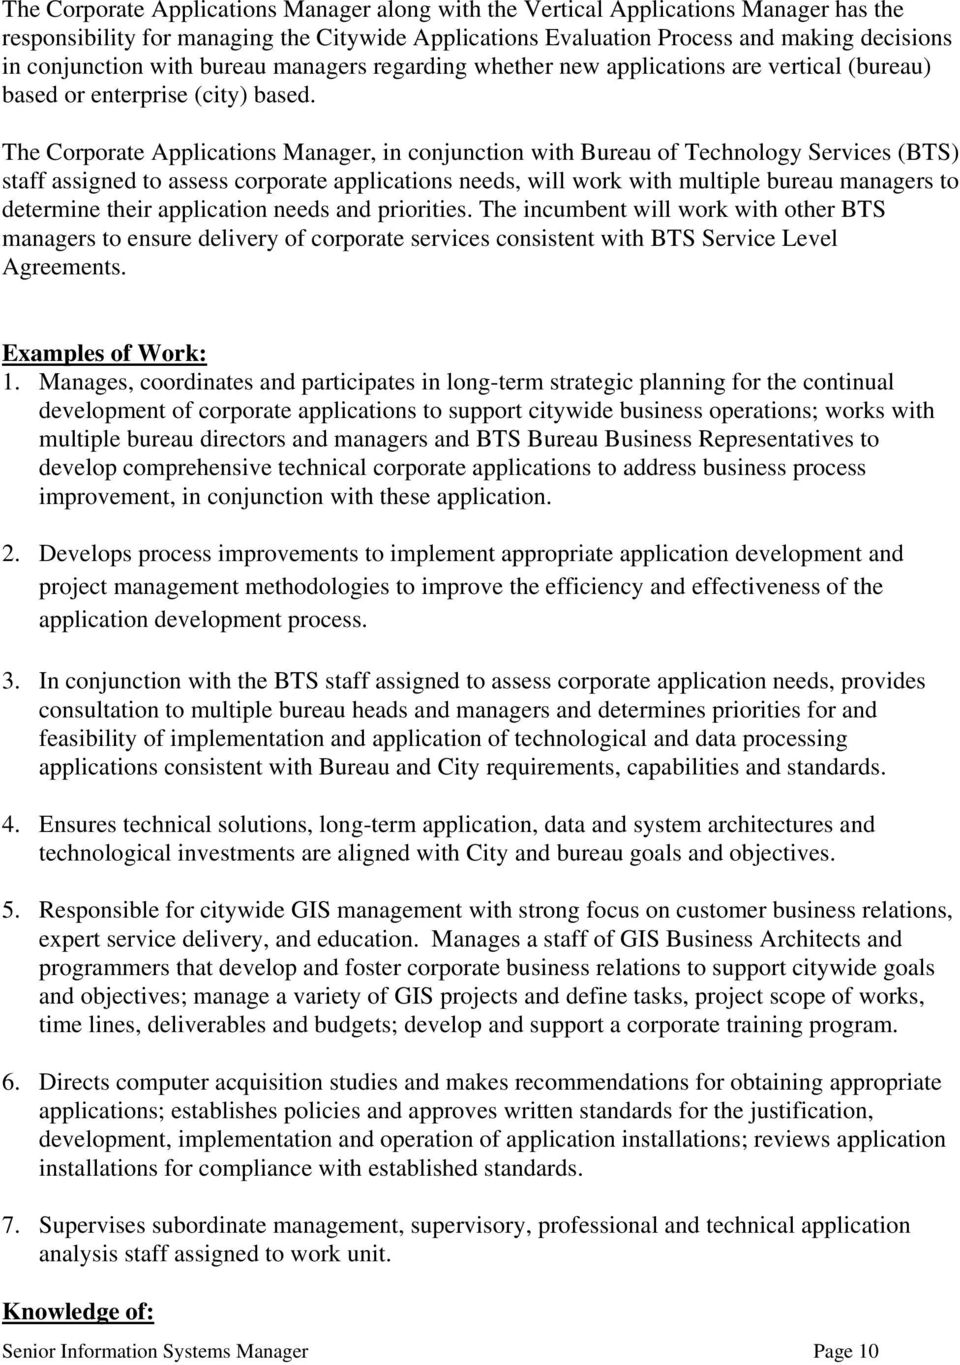 The Corporate Applications Manager, in conjunction with Bureau of Technology Services (BTS) staff assigned to assess corporate applications needs, will work with multiple bureau managers to determine